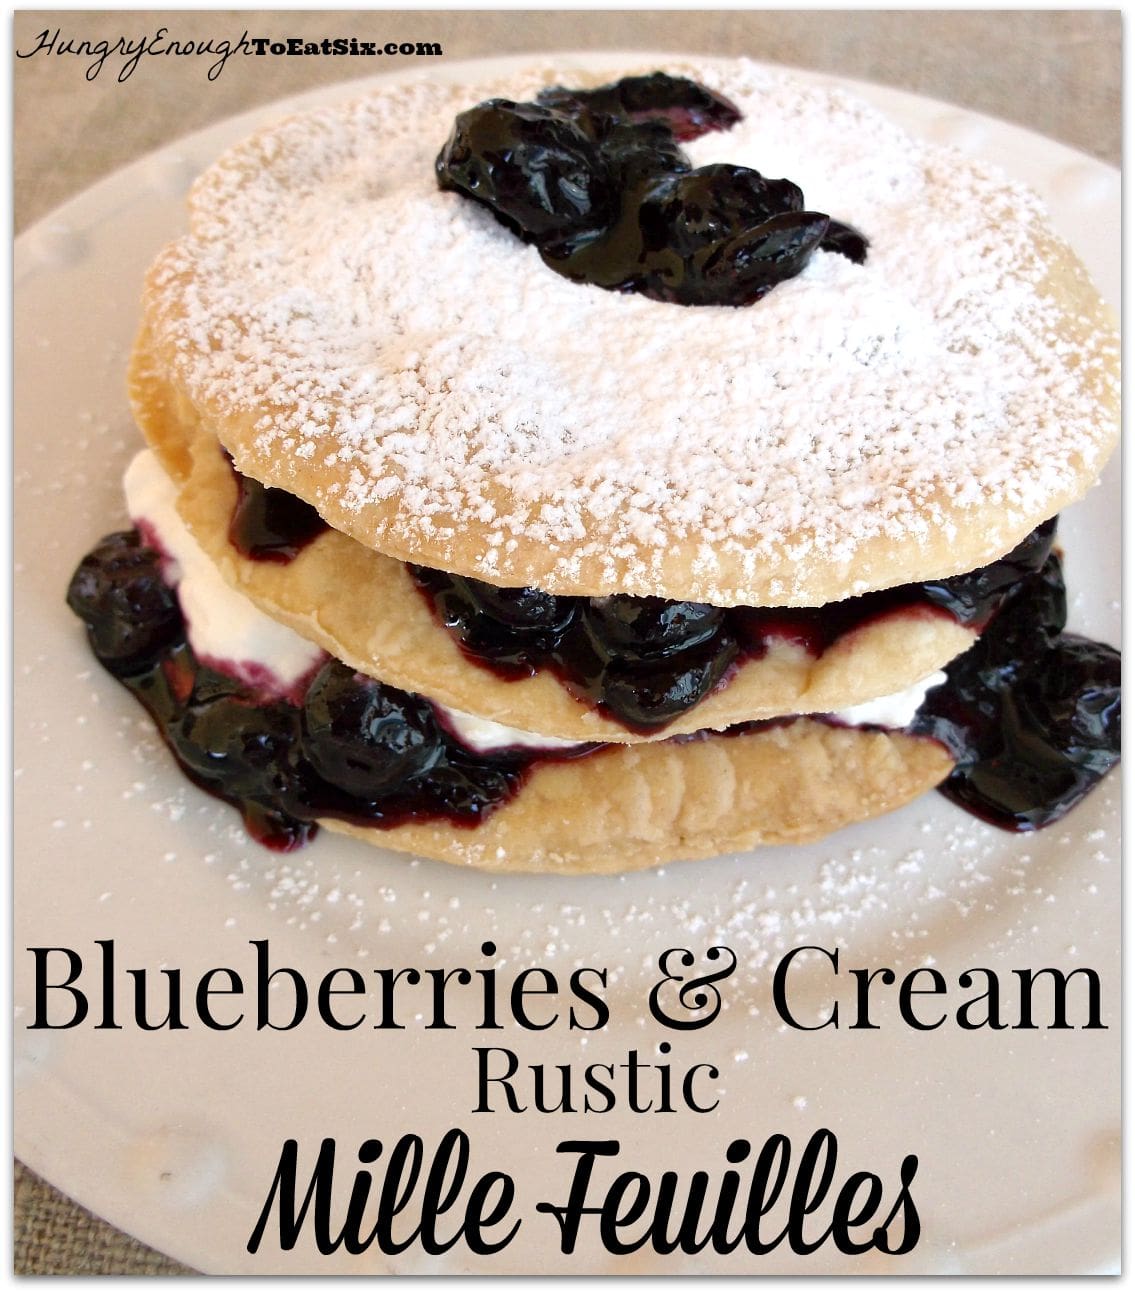 Stack of pastry, blueberries and cream